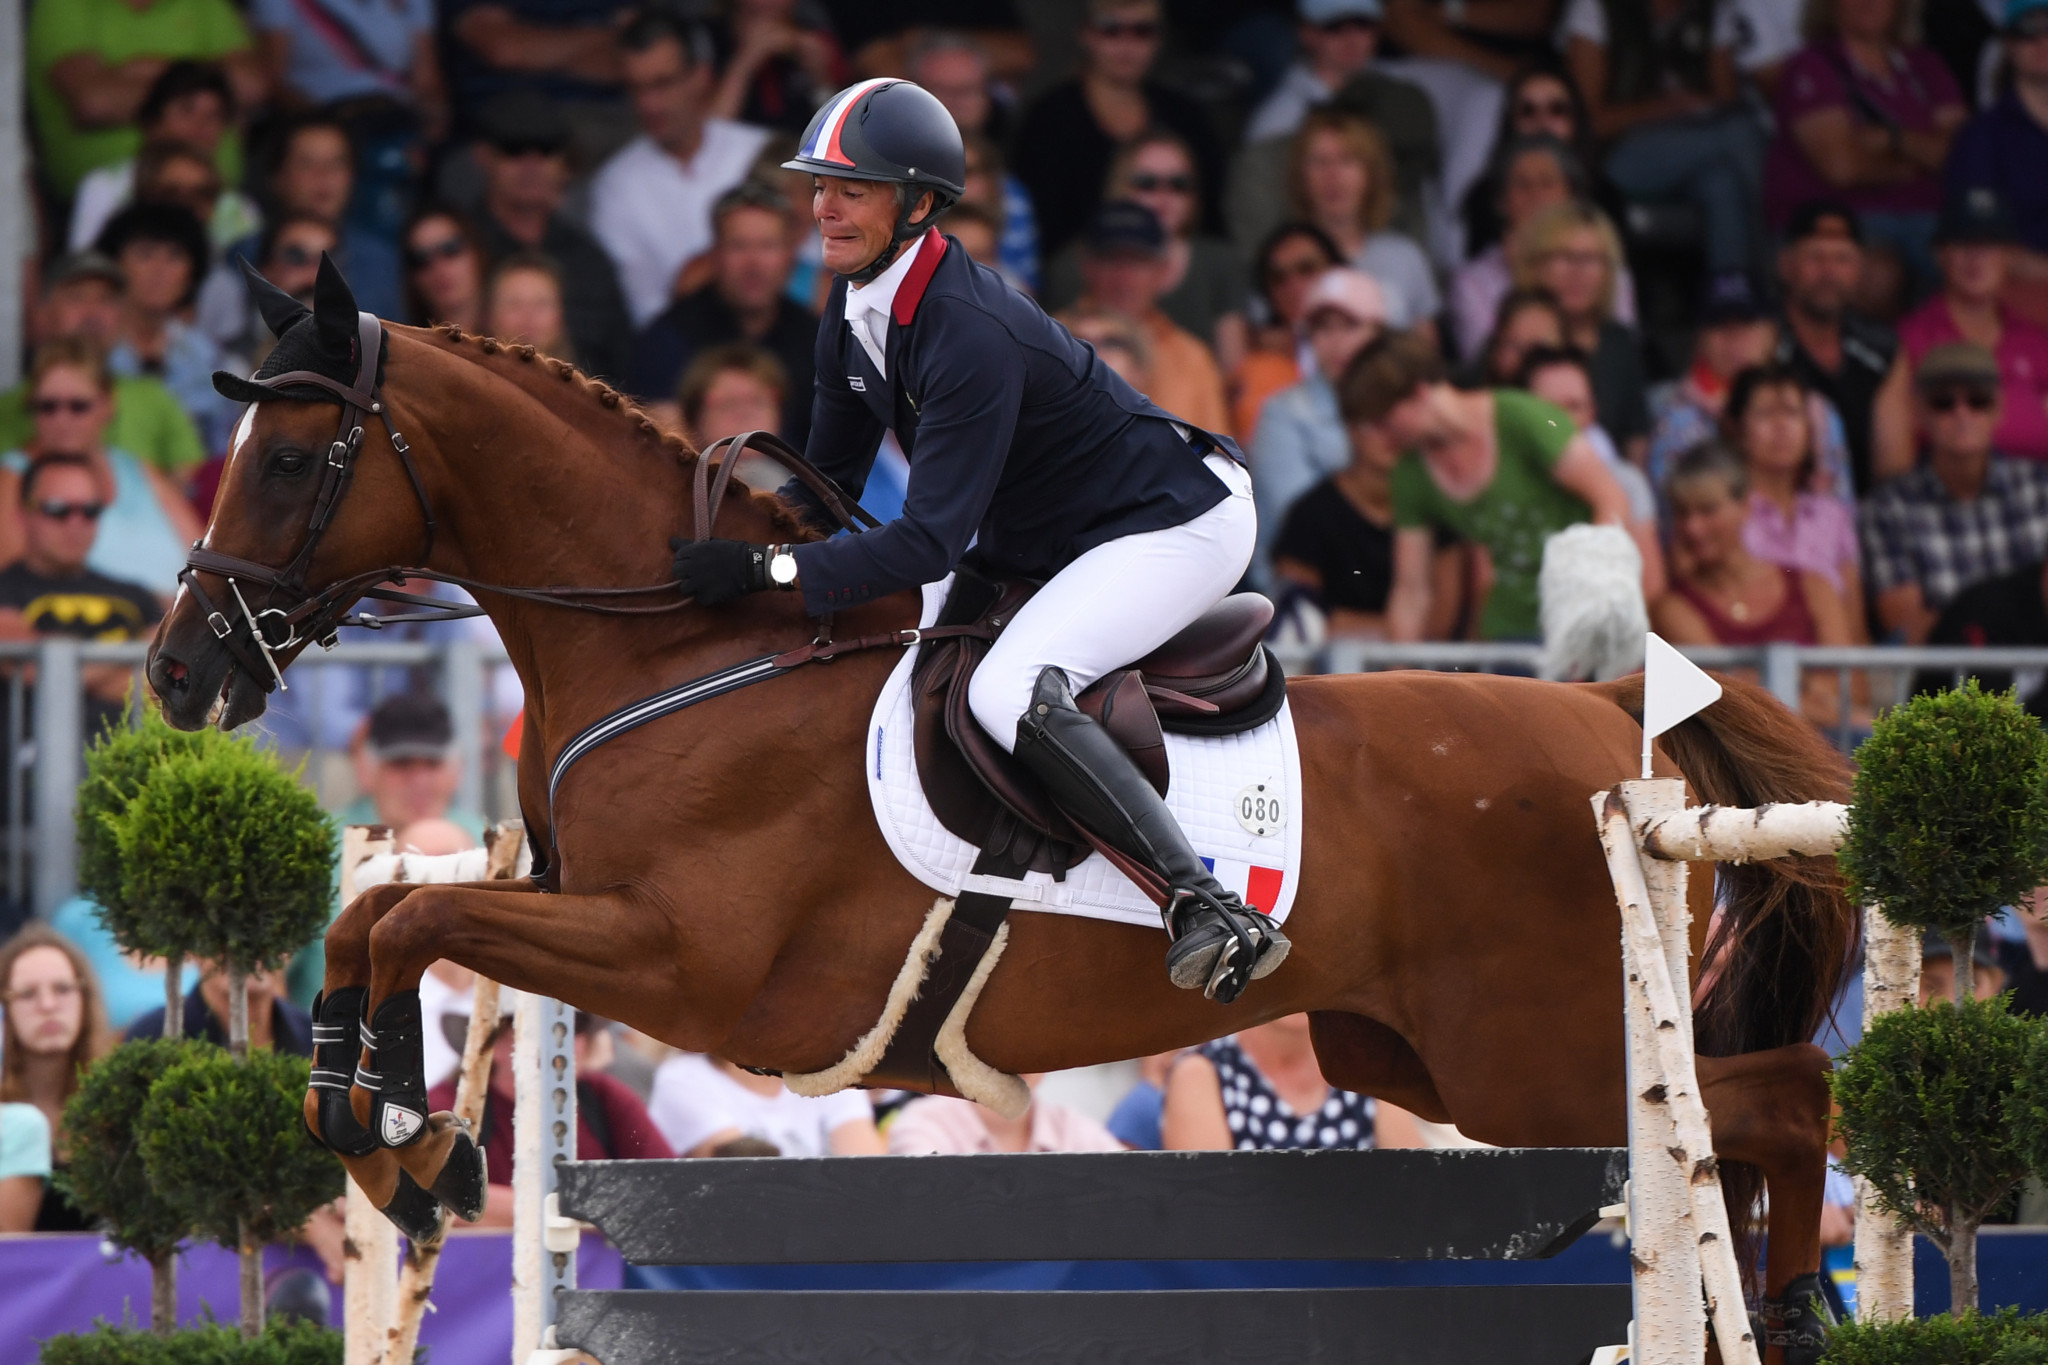 Waregem to host penultimate event of FEI Nations Cup Eventing series